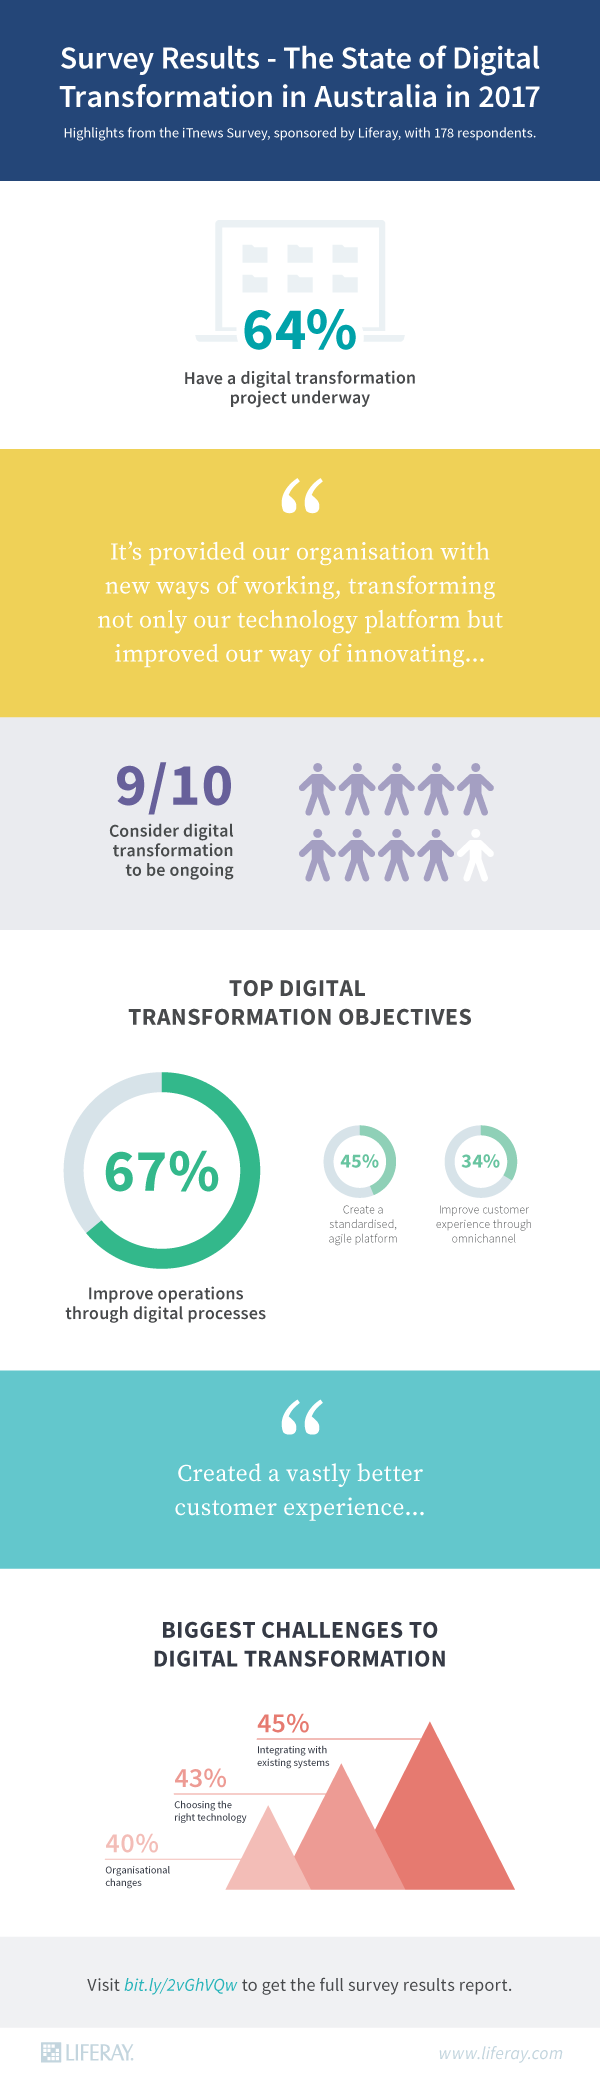 The State of Digital Transformation in Australia